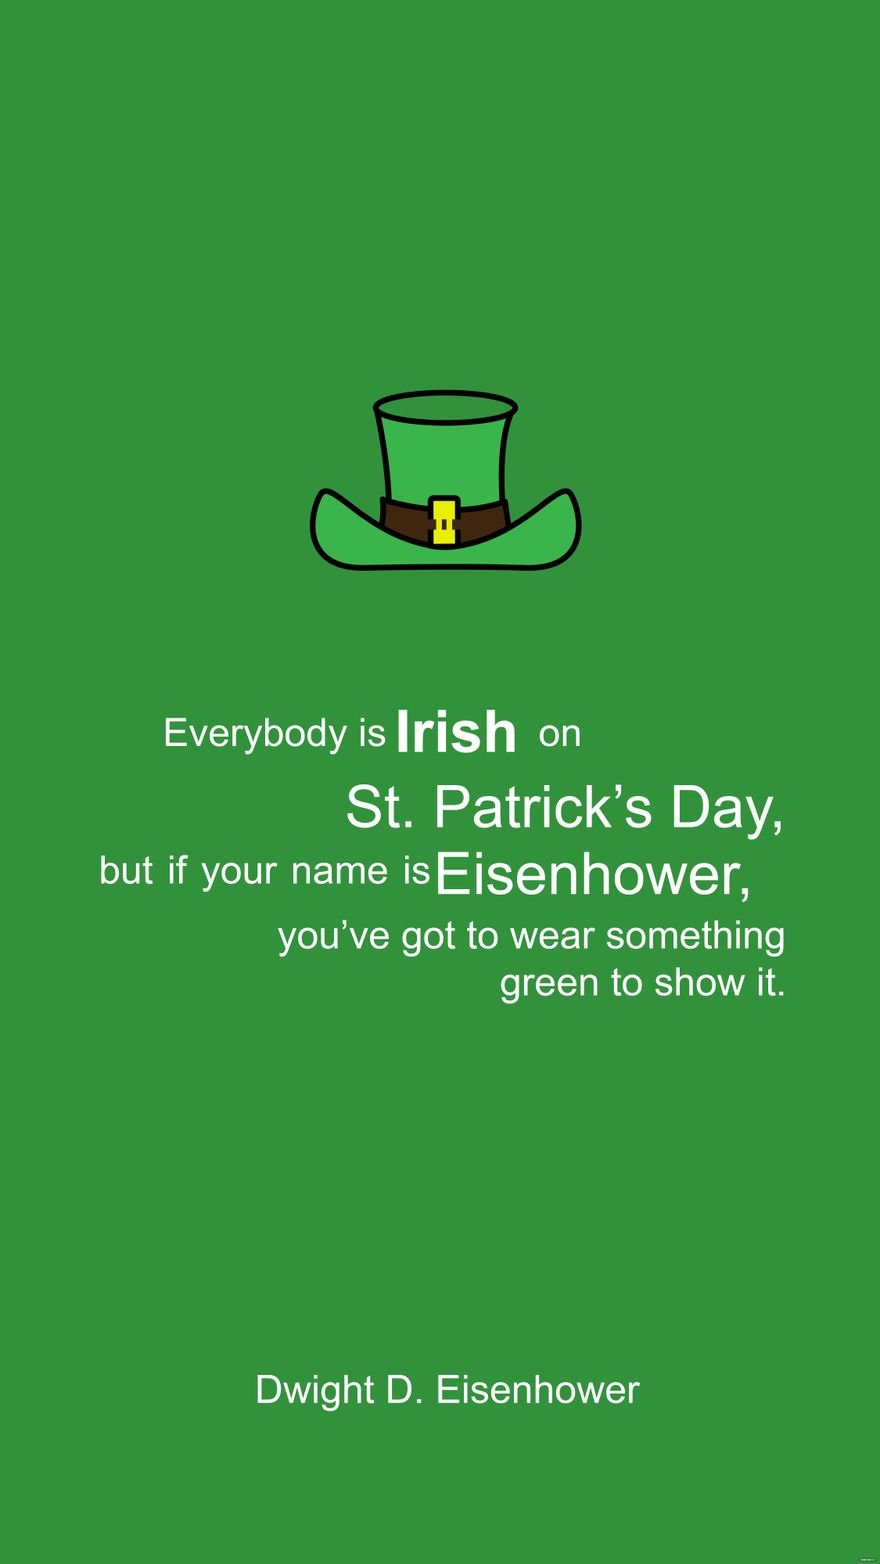 Dwight D. Eisenhower - Everybody is Irish on St. Patrick’s Day, but if your name is Eisenhower, you’ve got to wear something green to show it.